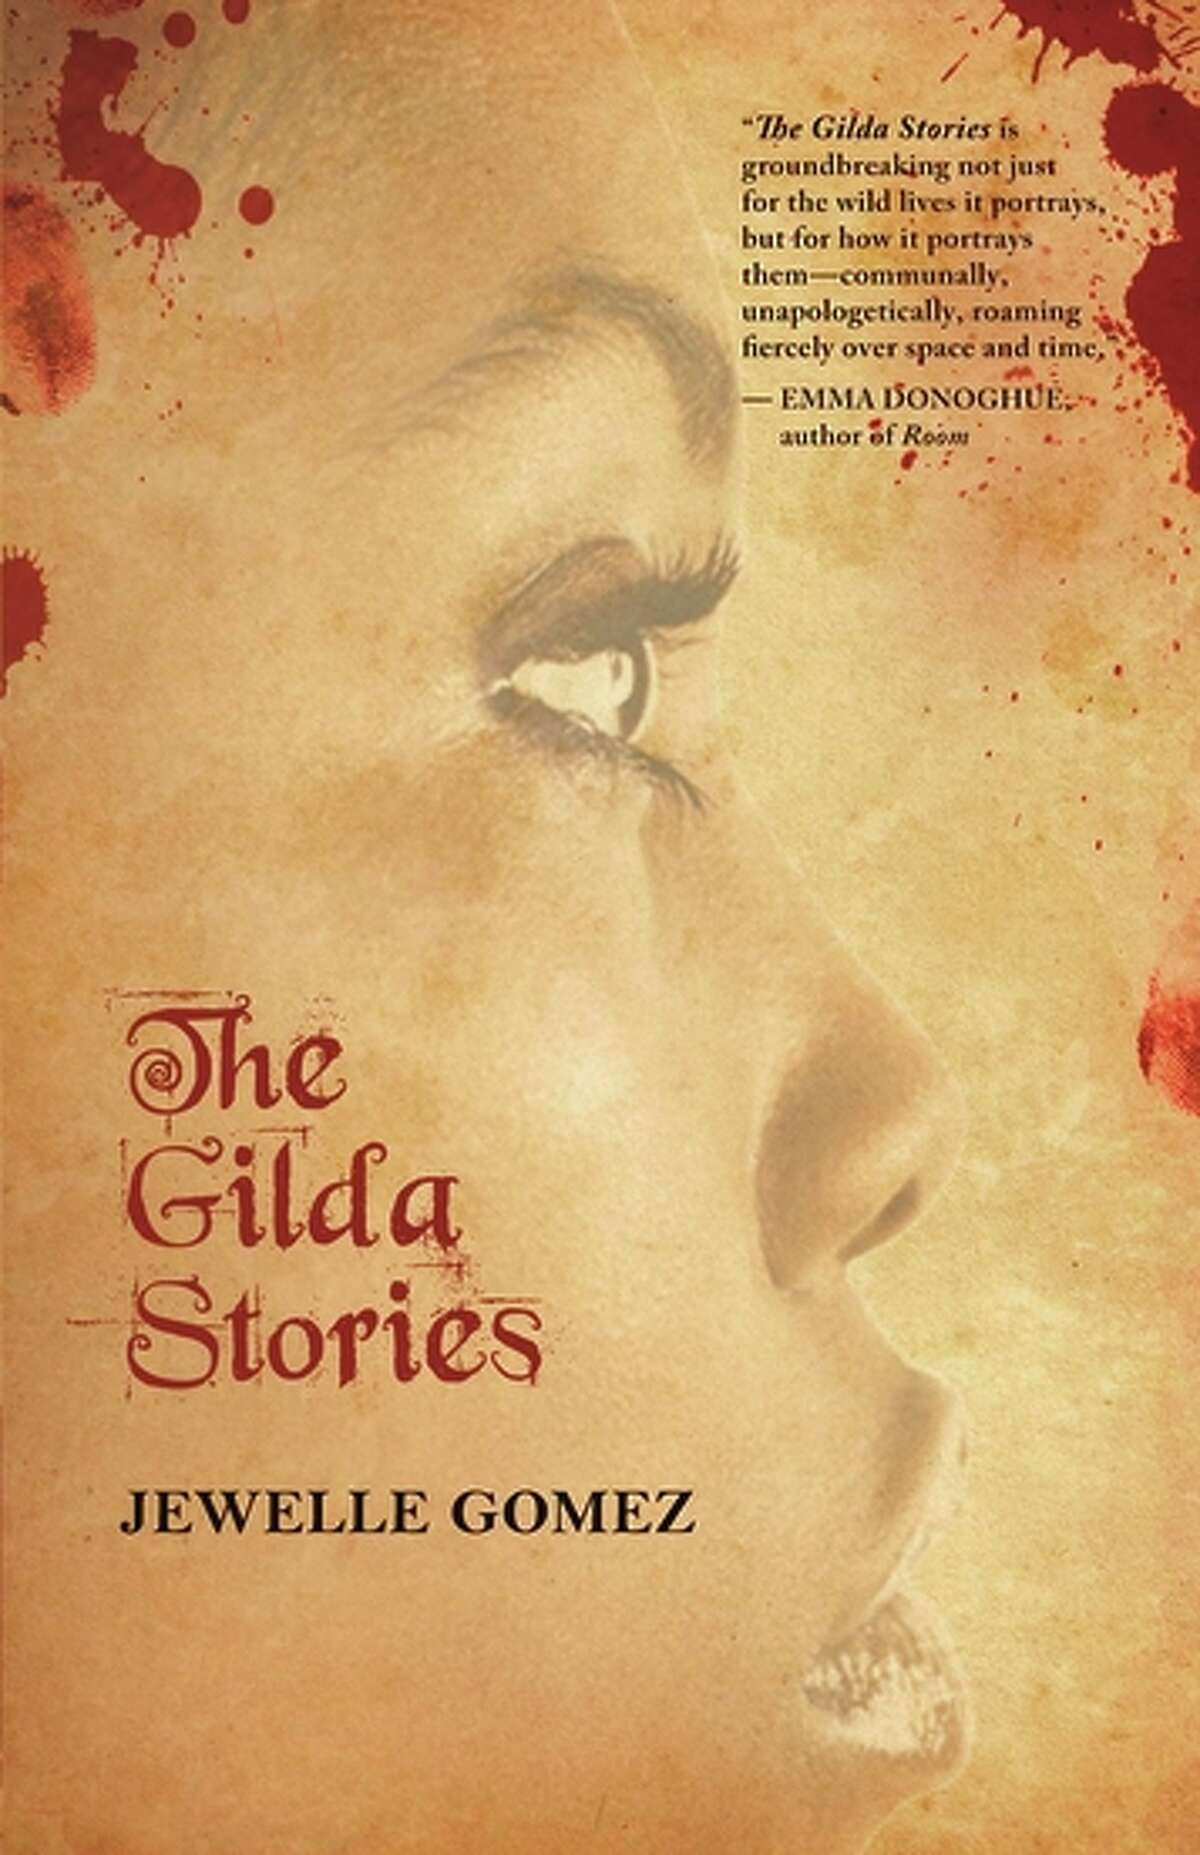 Jewelle Gomez’s novel “The Gilda Stories,” about a black lesbian vampire, was rejected many times before it was published in 1991.